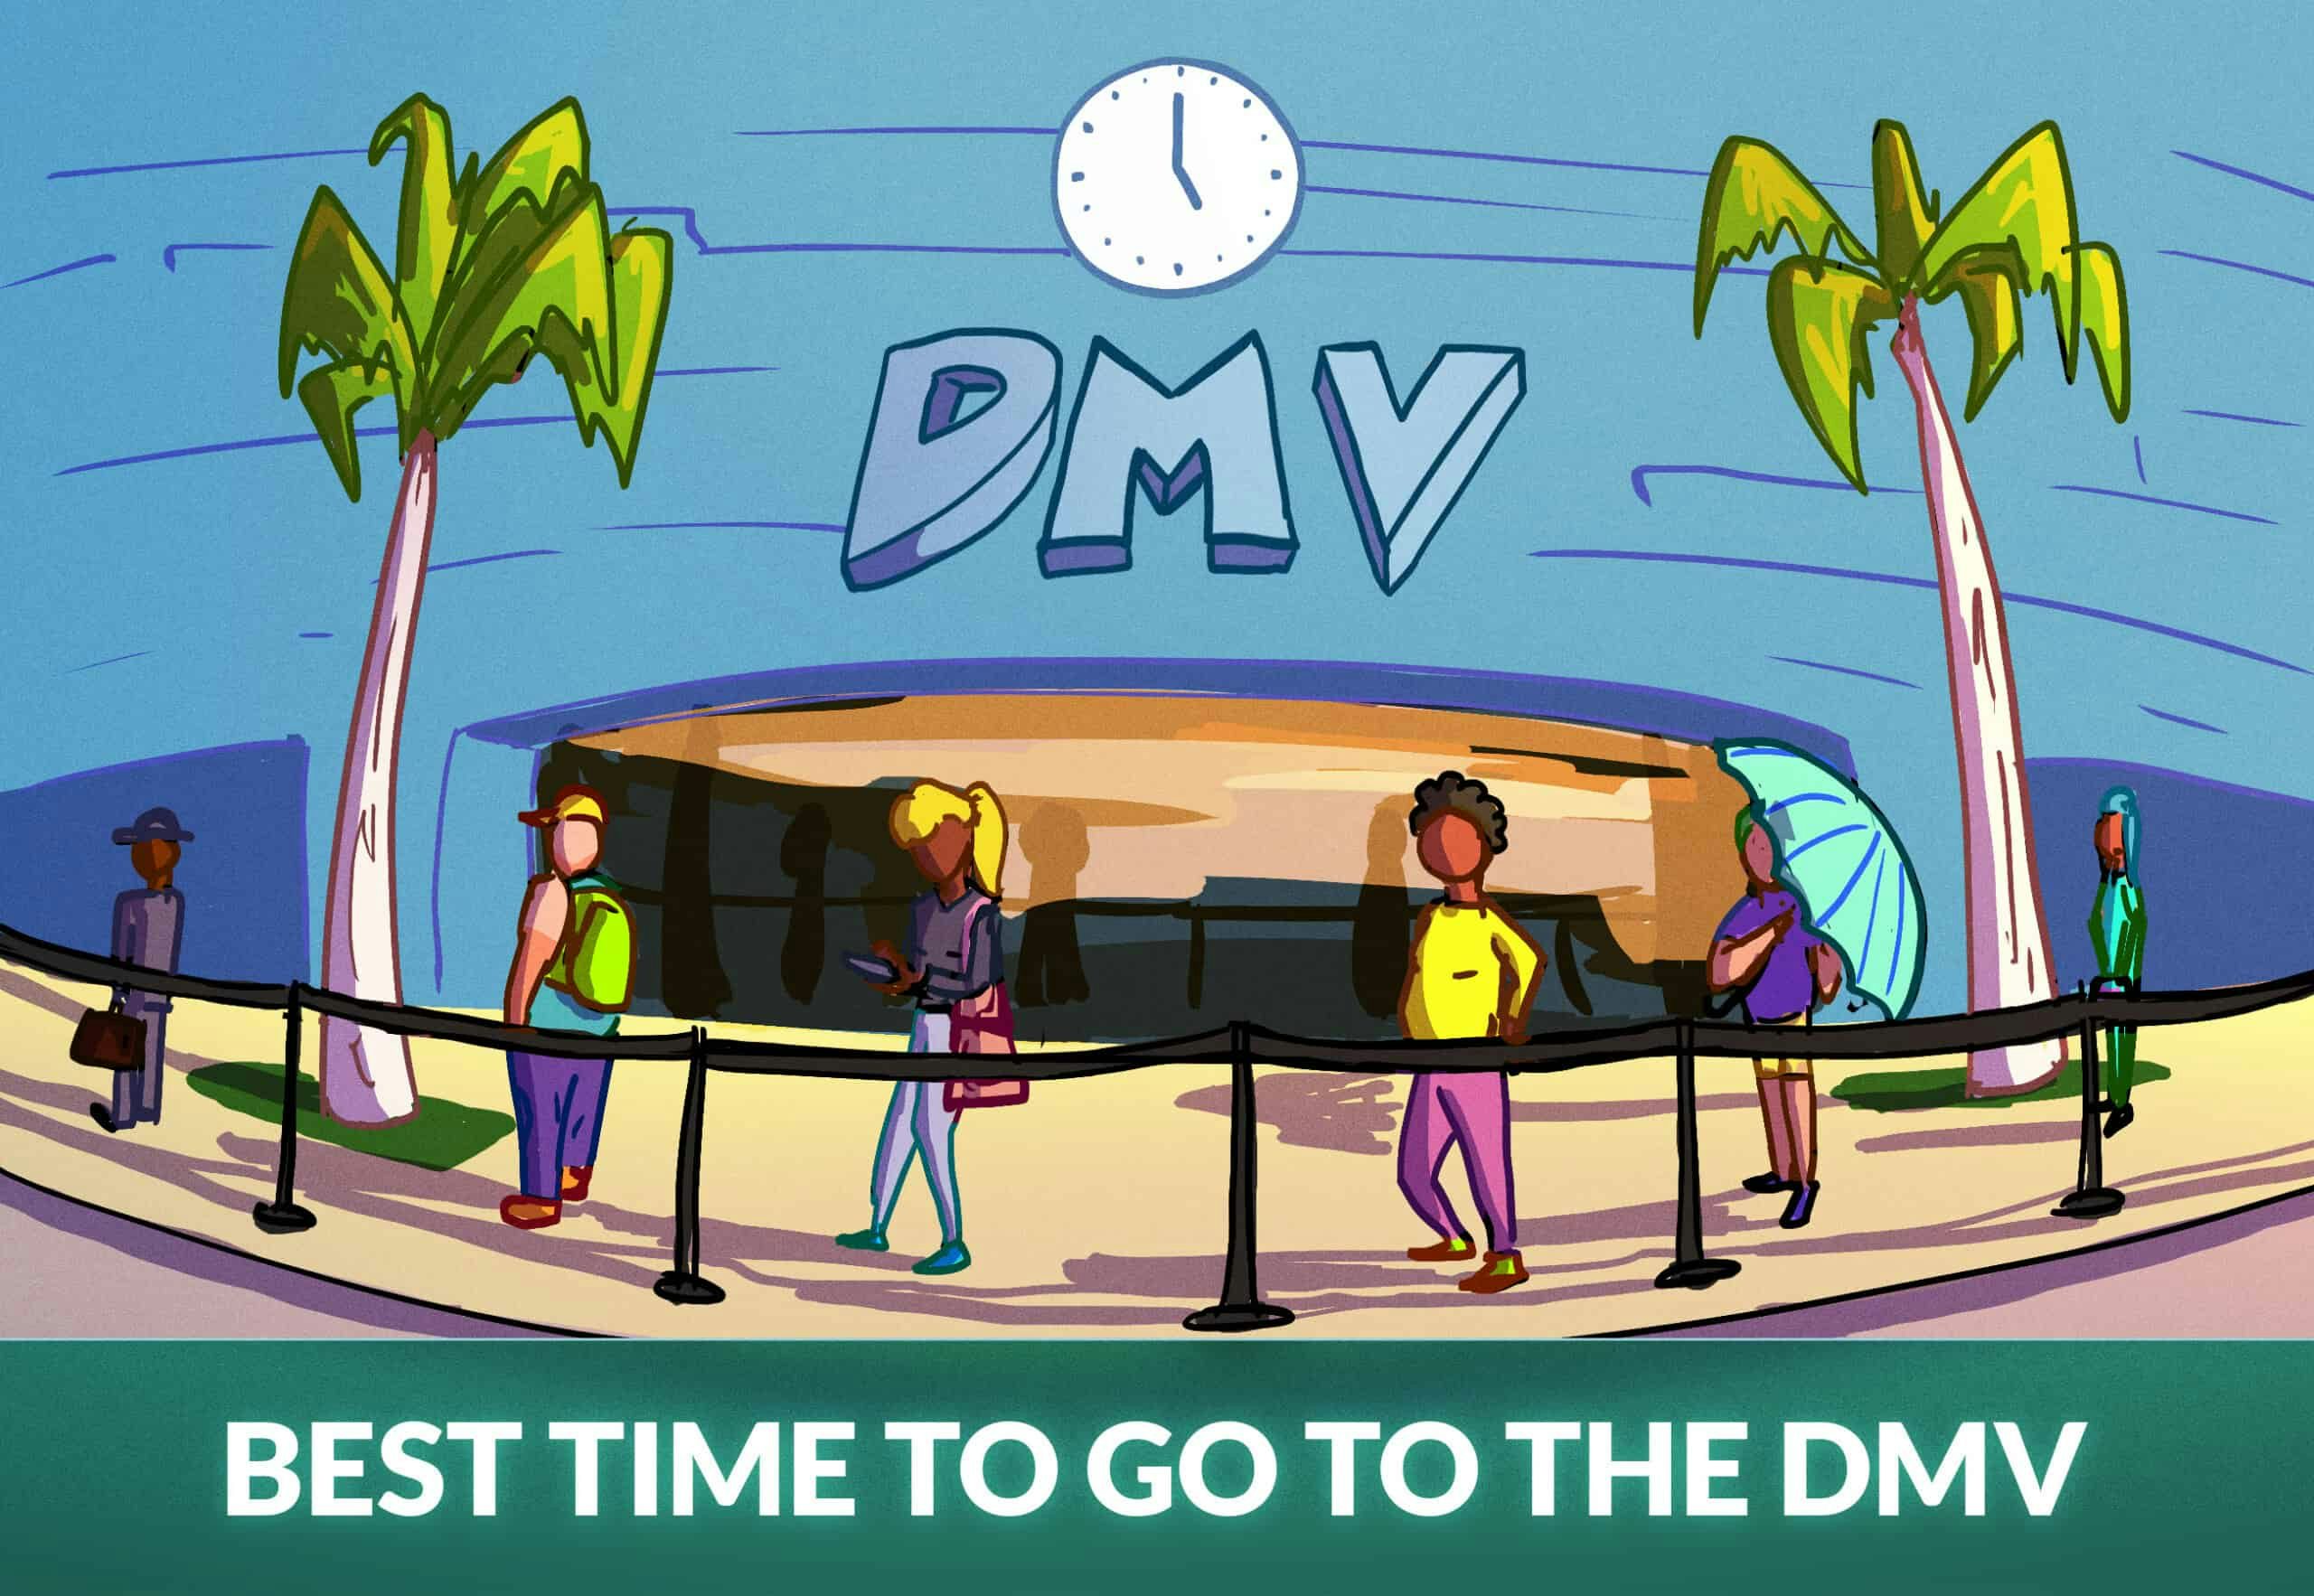 BEST TIME TO GO TO THE DMV